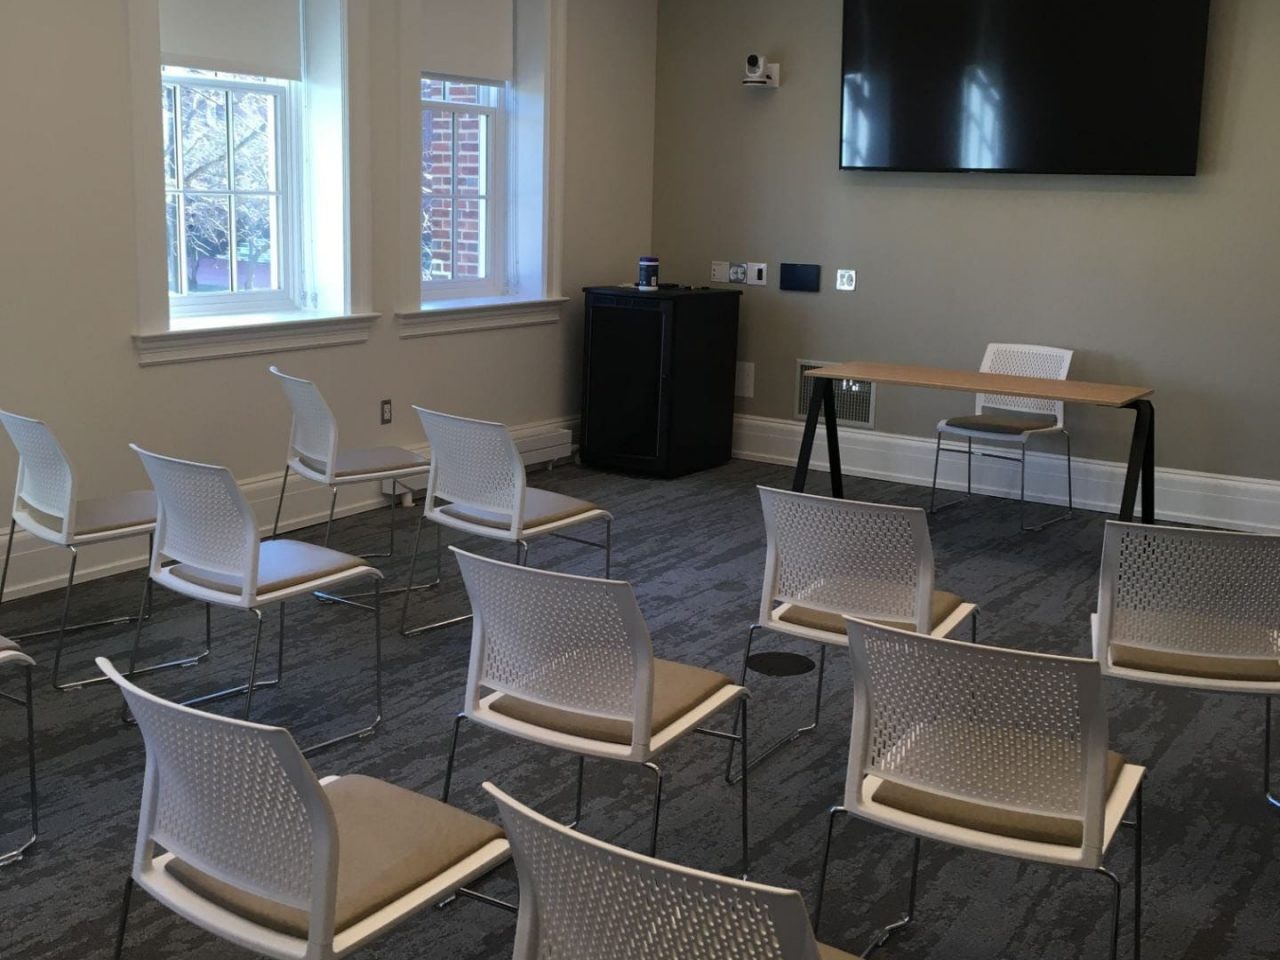 Room with chair arranged in classroom-style and a large digital display